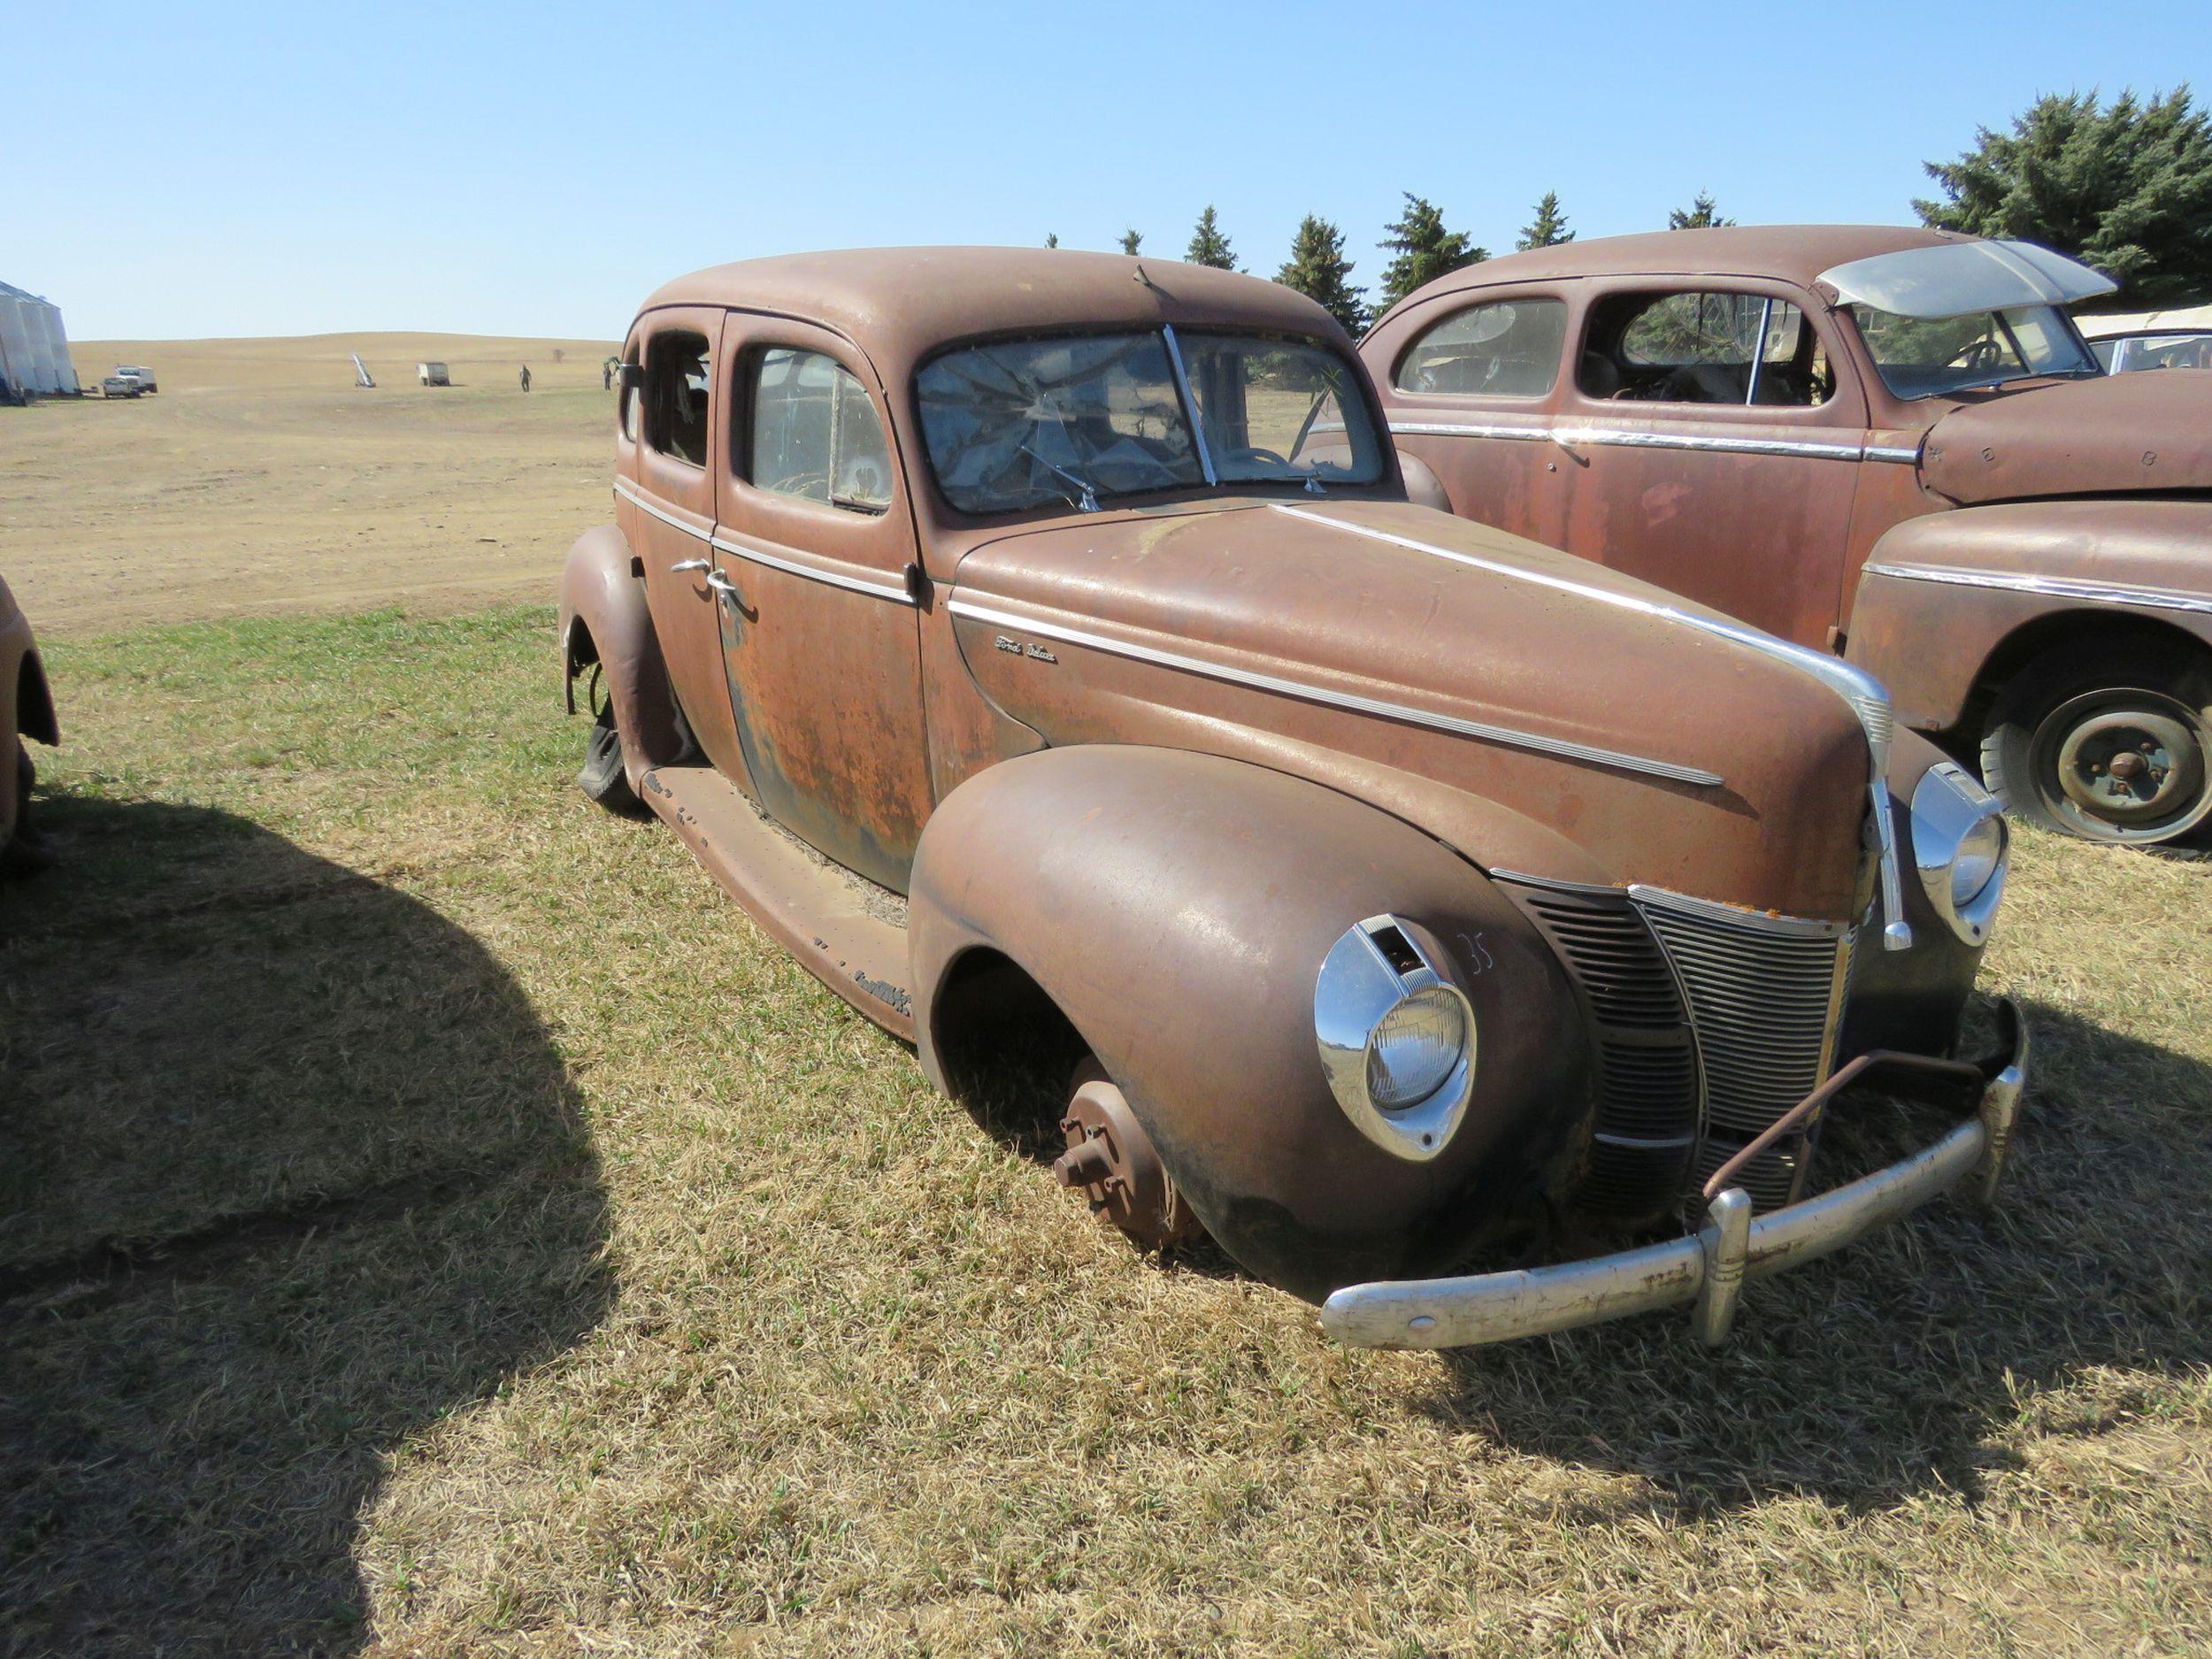 1940 Ford 4 dry Suicide Sedan for rod or restore